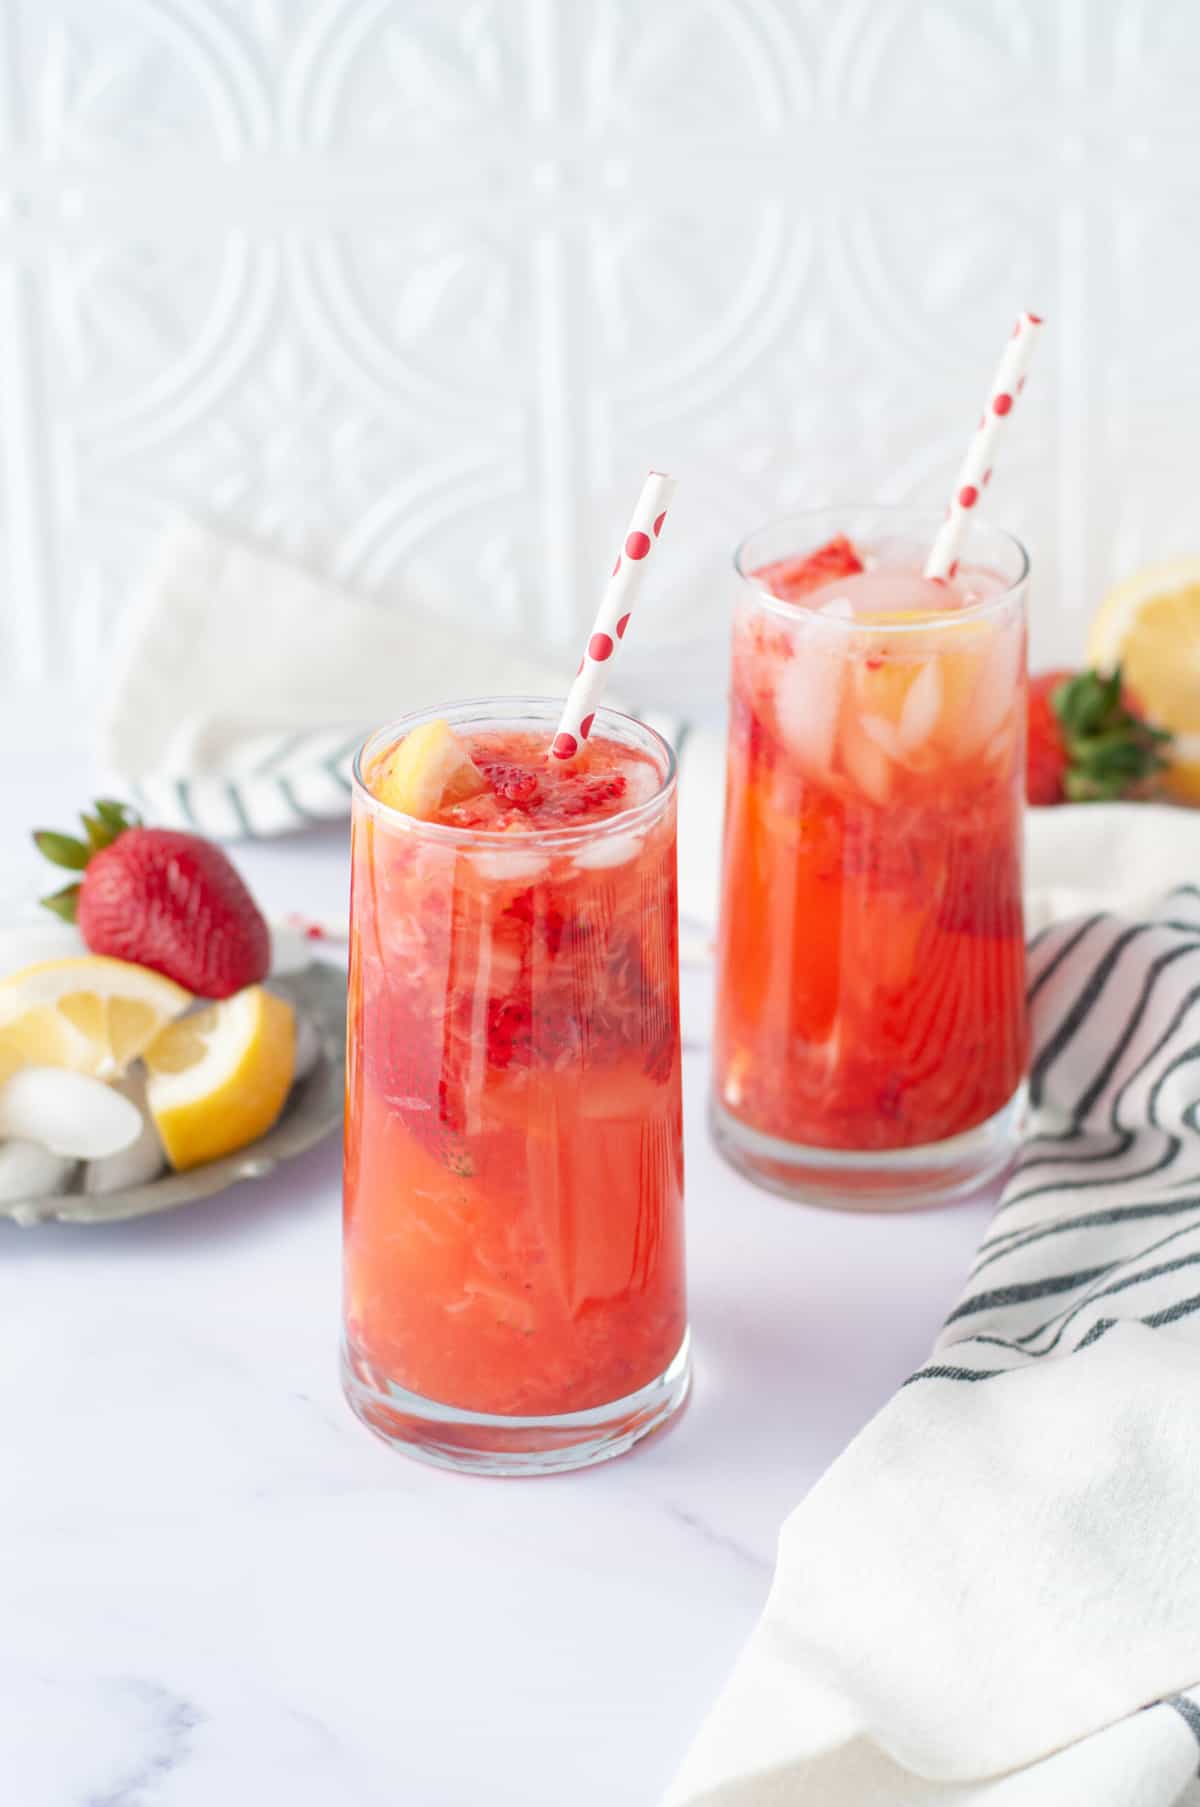 Tall glasses with a strawberry lemonade cocktail in them. Red and white striped straw, garnished with strawberries and lemons